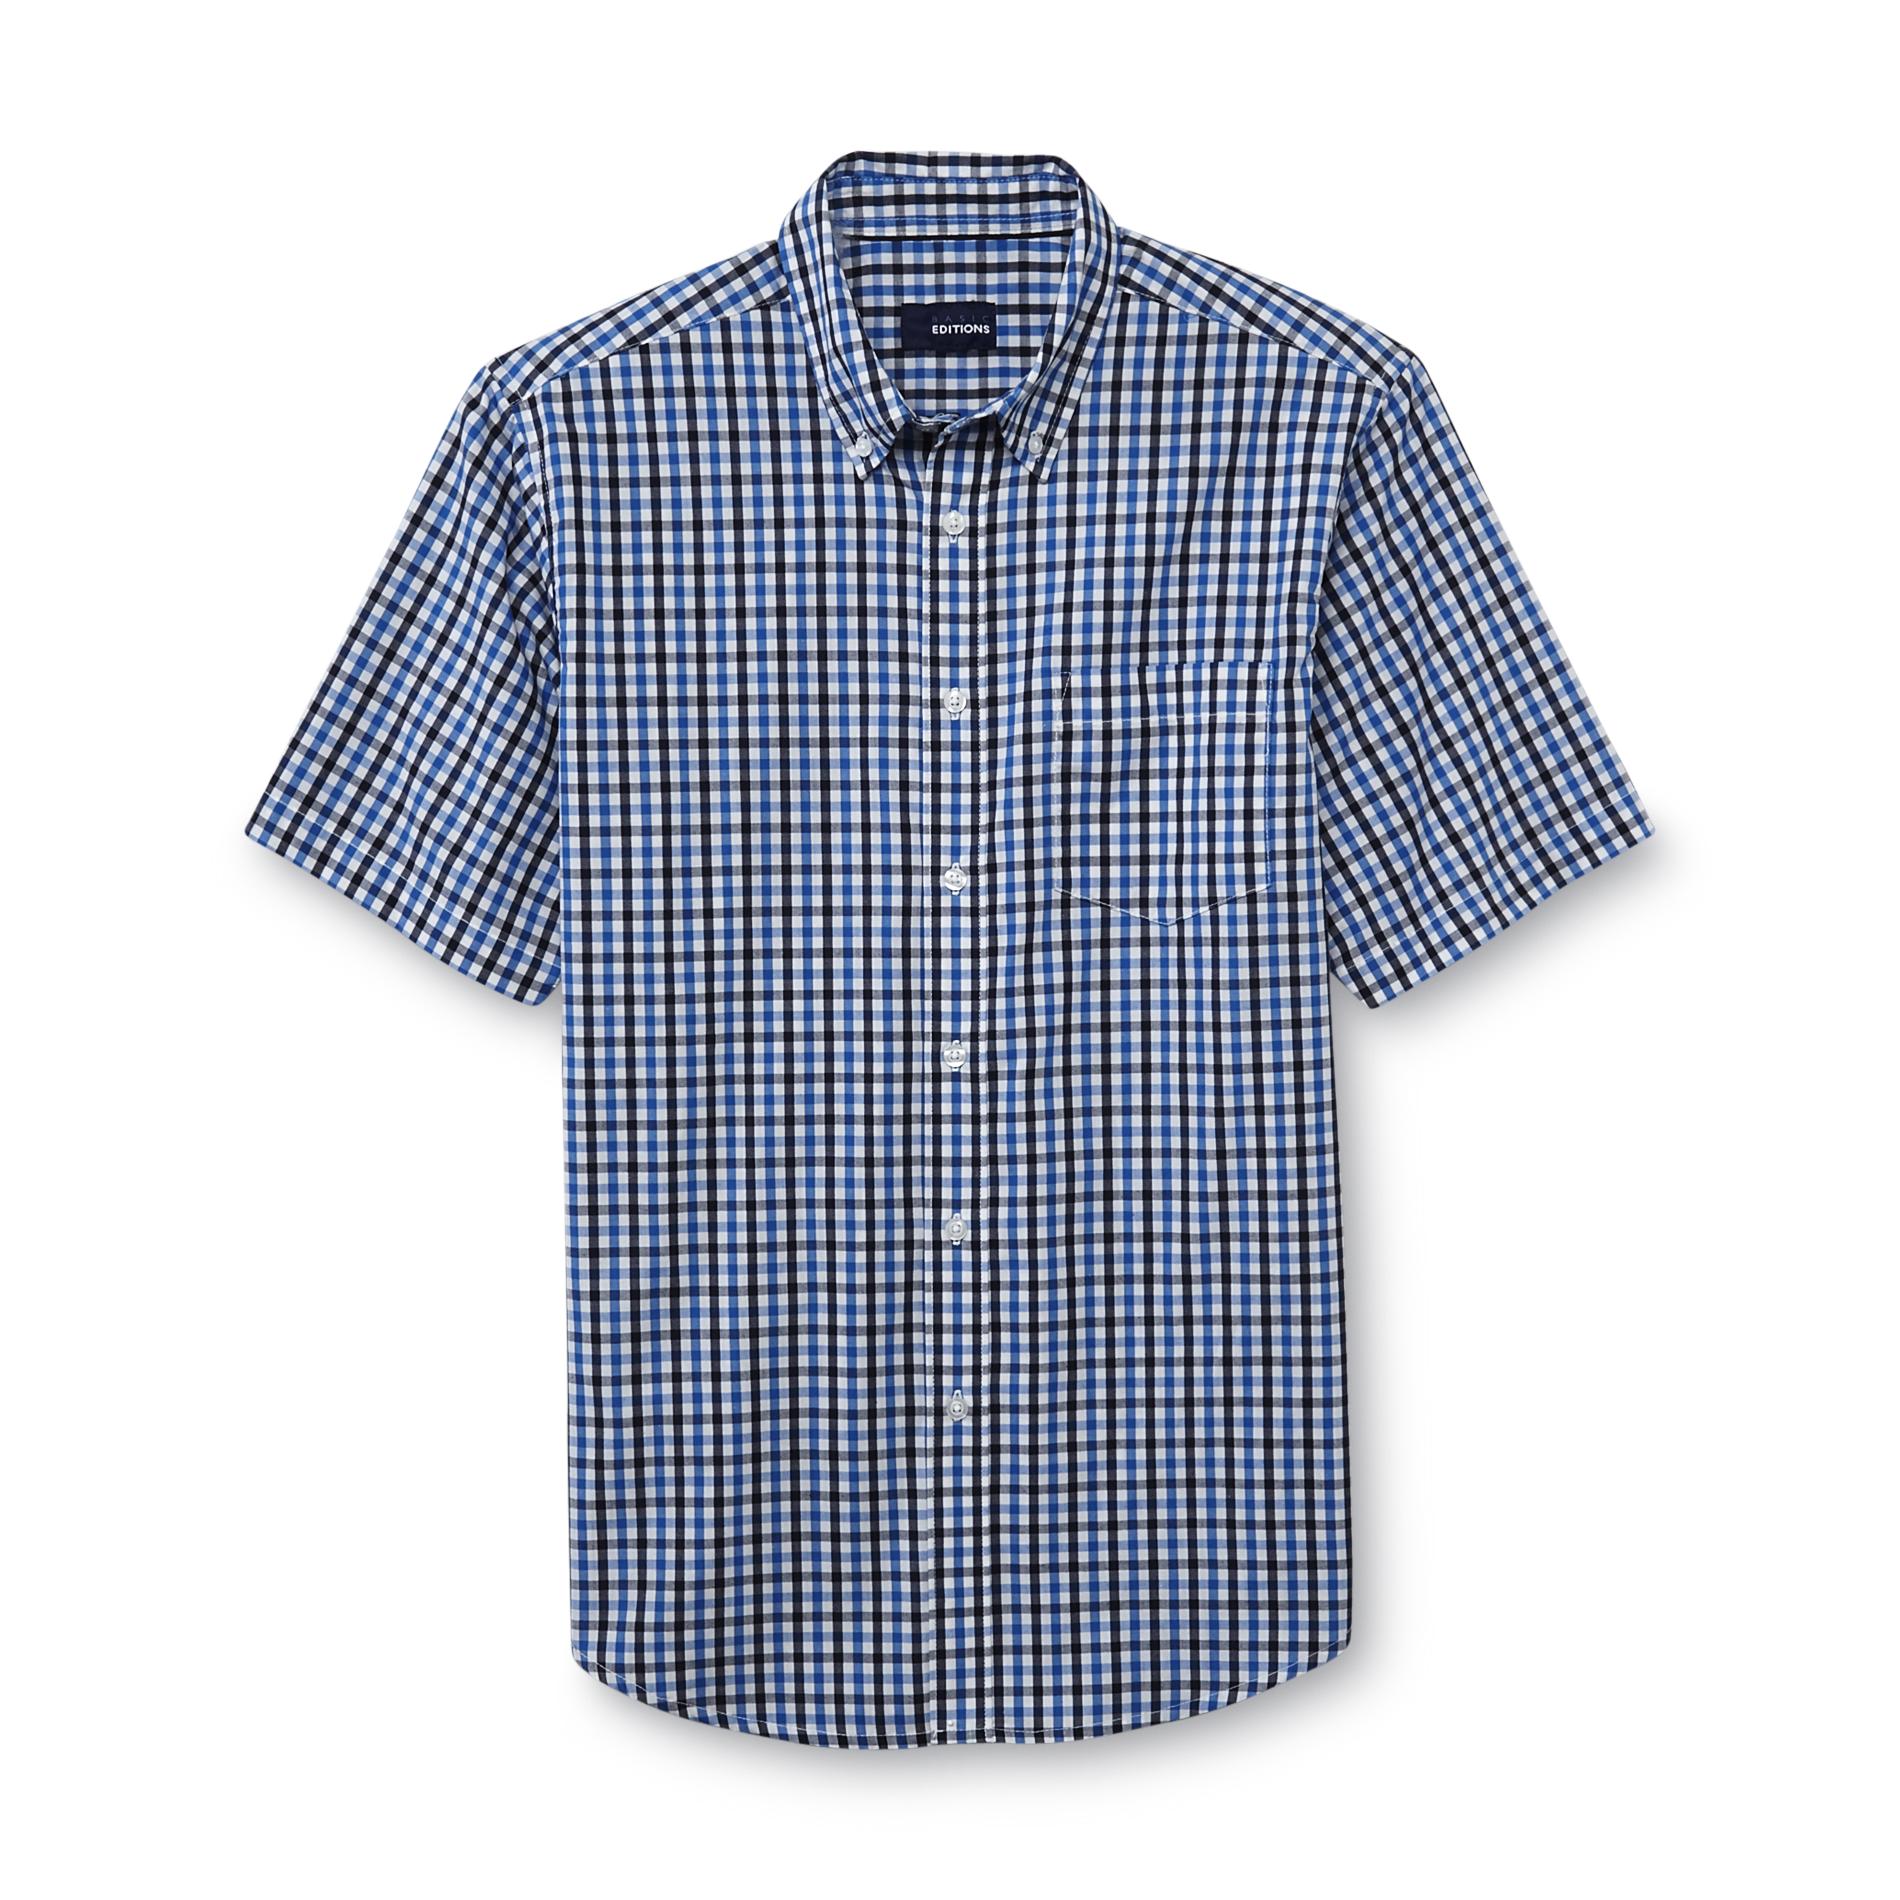 Basic Editions Men's Big & Tall Button-Front Shirt - Gingham